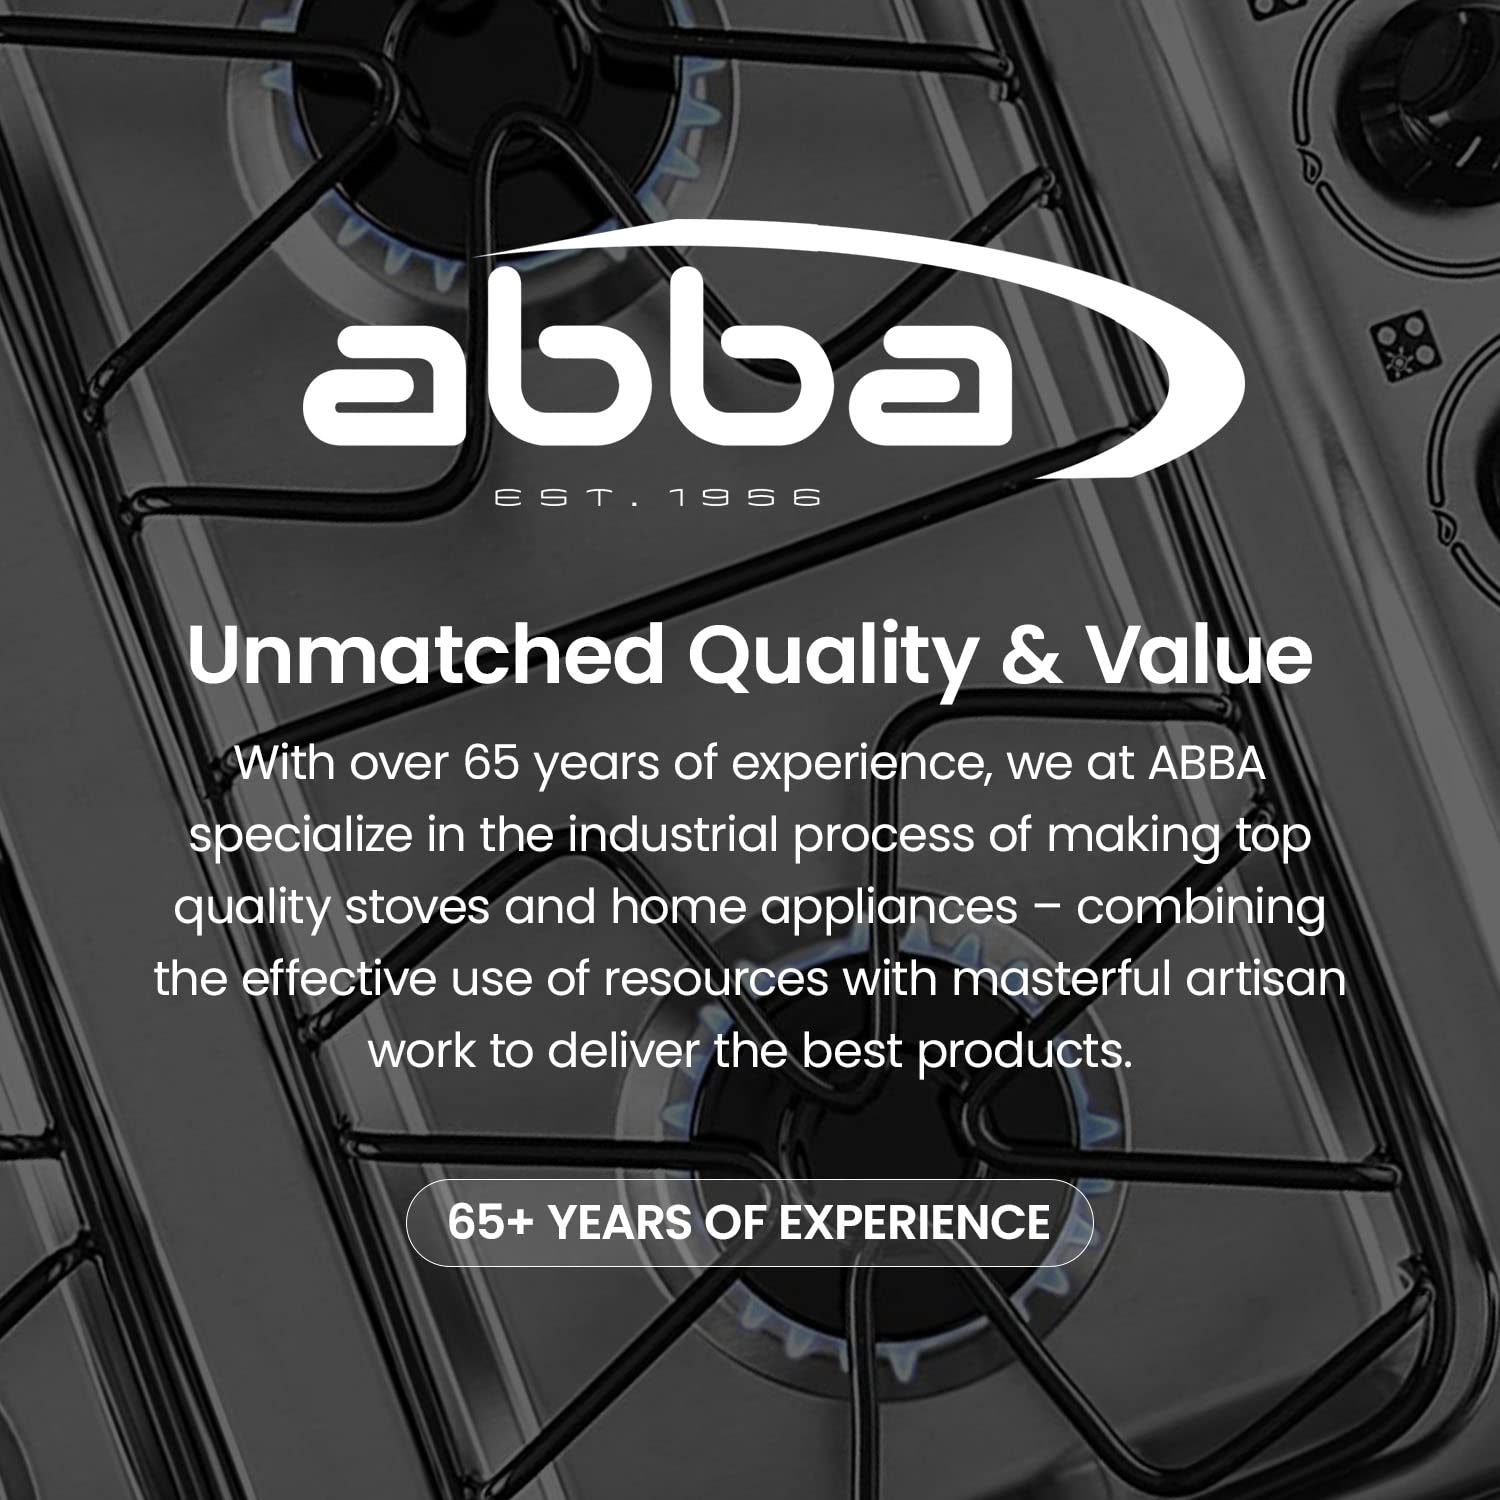 ABBA 24" Gas Cooktop with 4 Burners - Stainless-Steel Table Top with SABAF Aluminum Burners And Porcelain Surface, Home Improvement Essentials, Anti Spill & Easy to Clean, 24" x 3.5" x 19"